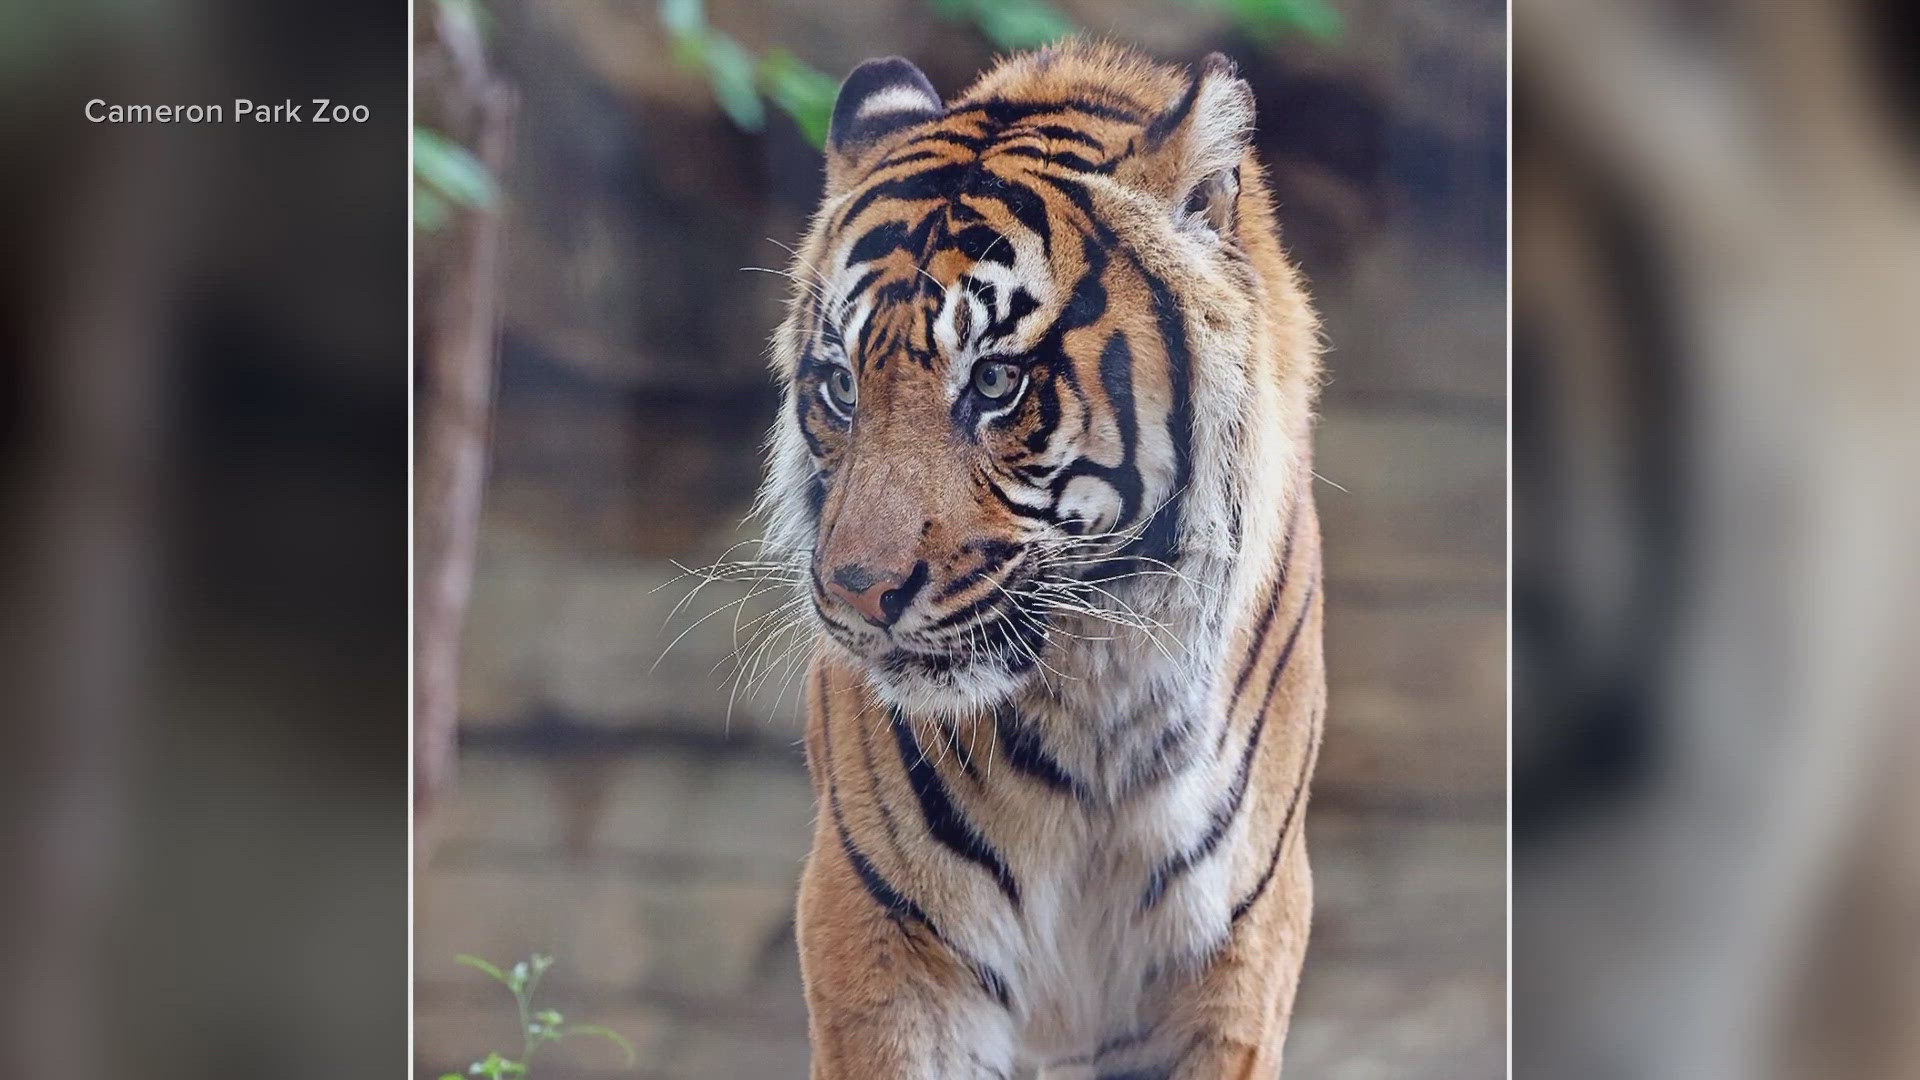 Kucing was the oldest male Sumatran Tiger in North America, and among the top three longest-living Sumatran Tigers in the world.